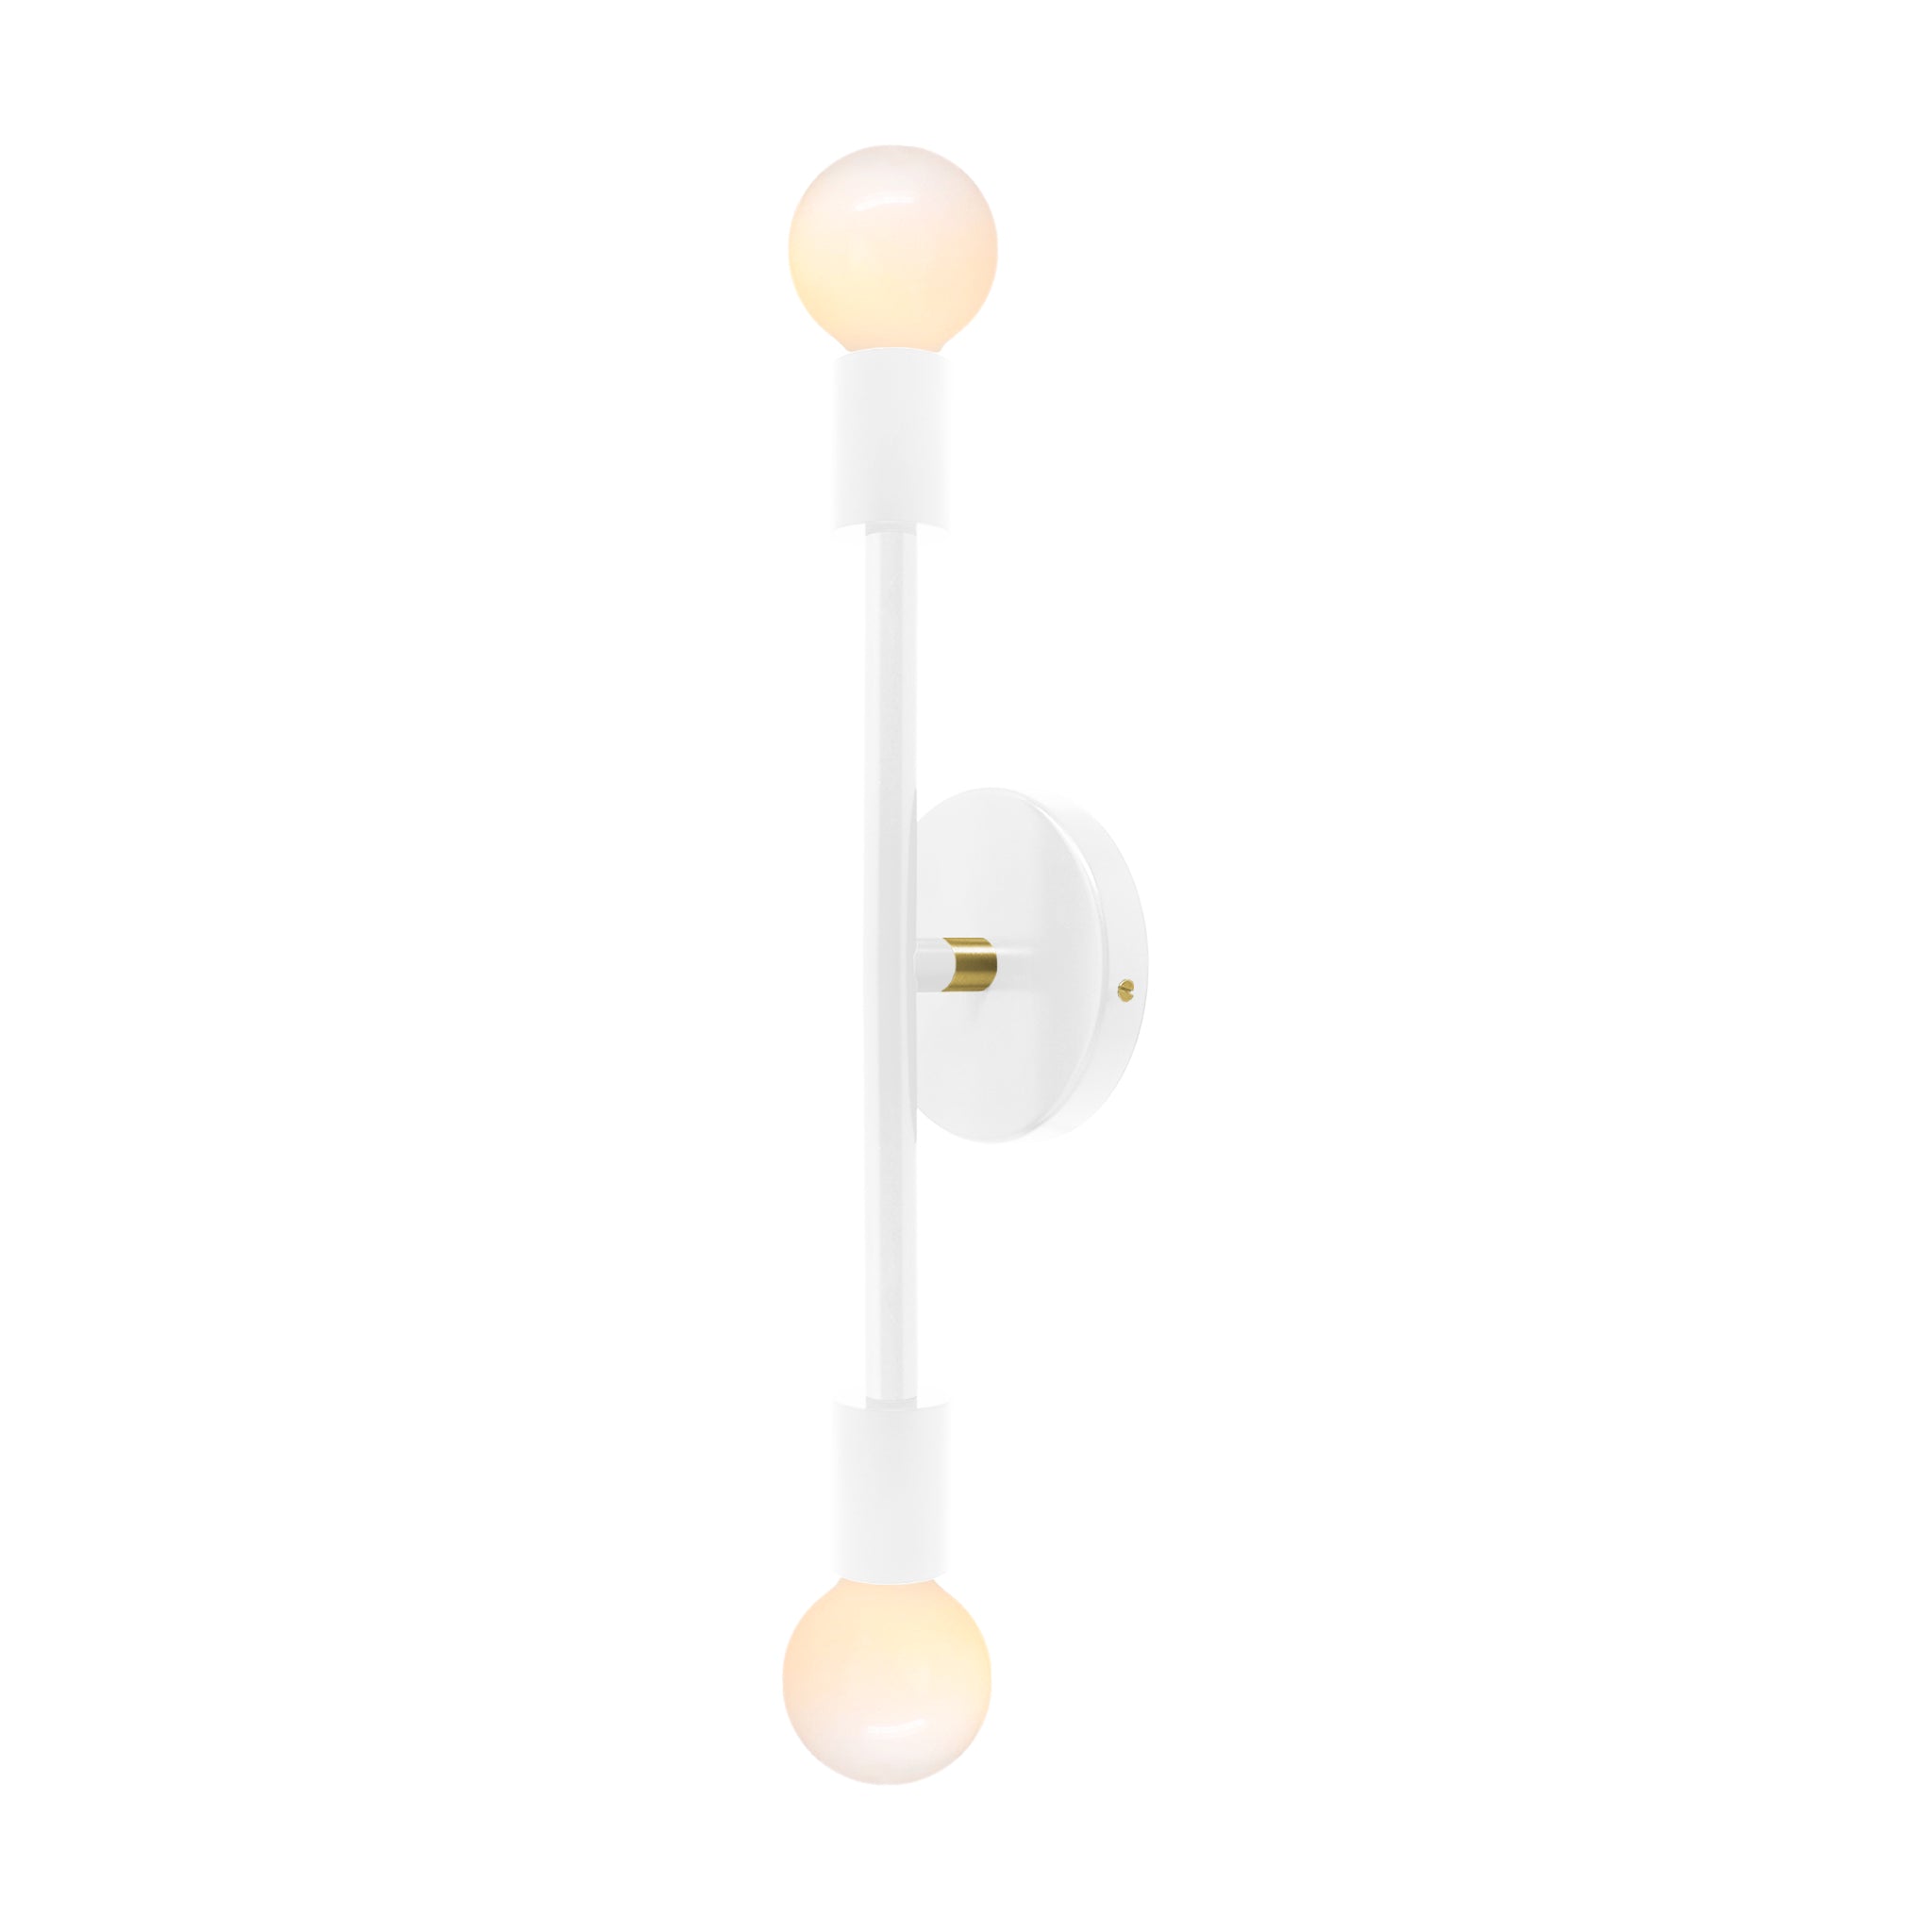 Brass and white color Pilot sconce 17" Dutton Brown lighting